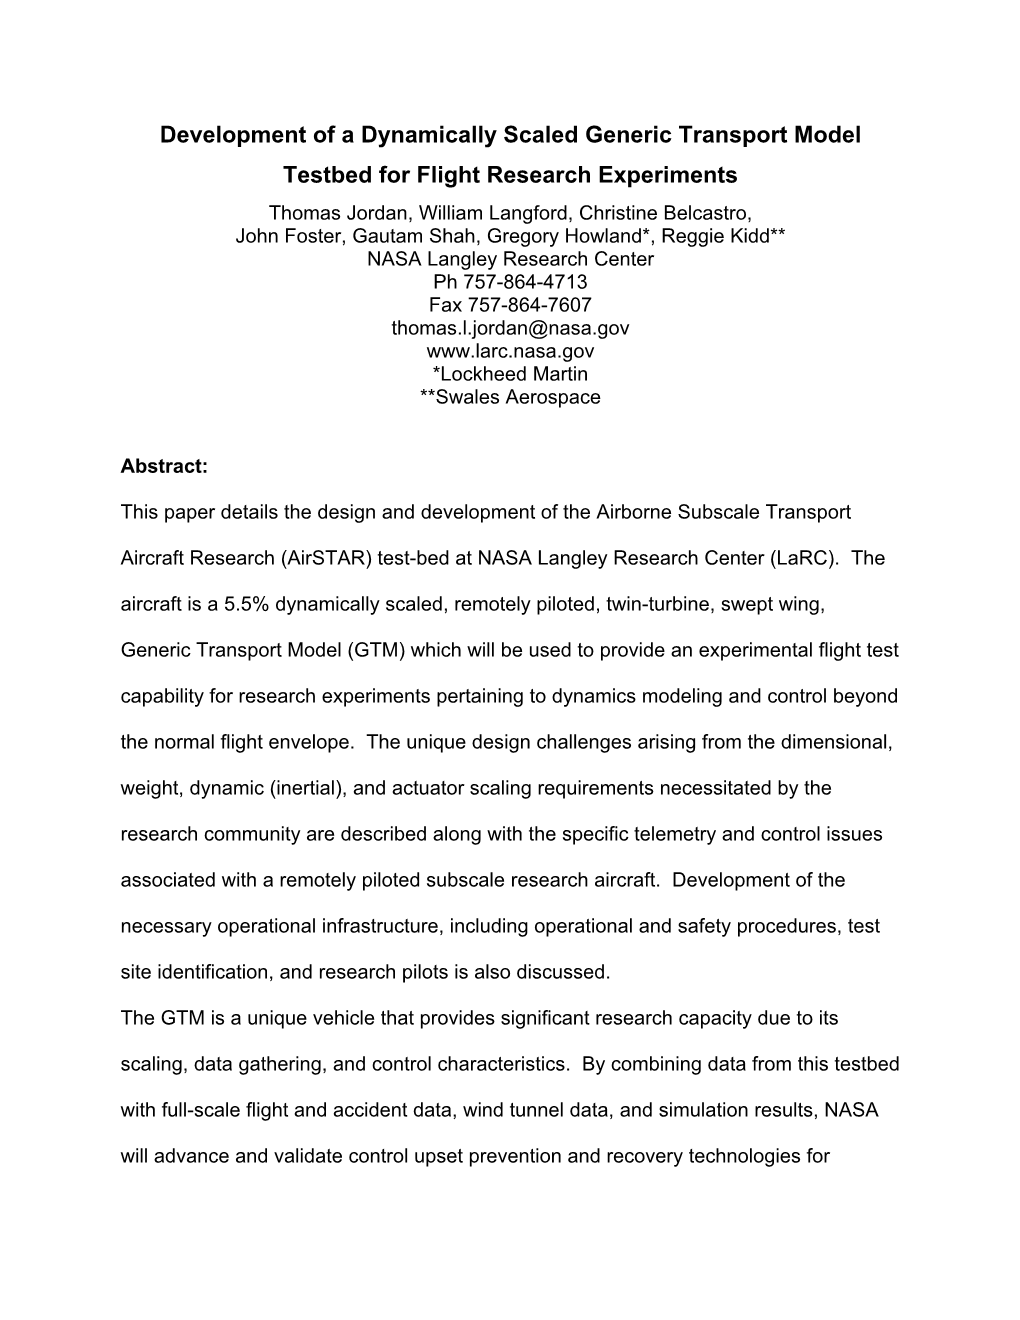 Development of a Dynamically Scaled General Transport Model Testbed